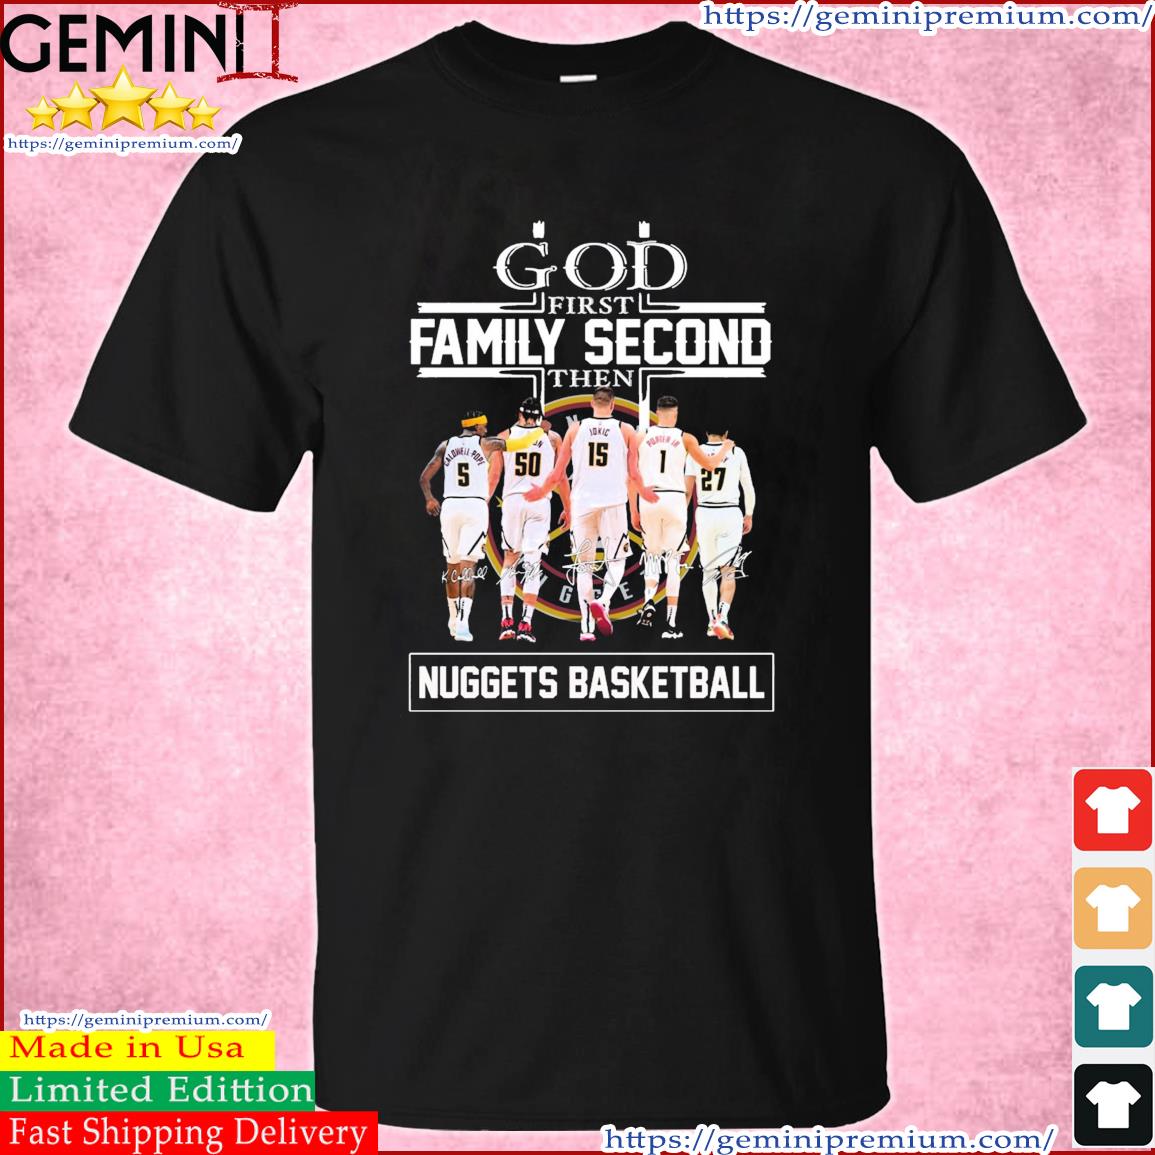 God Family Second First Then Denver Nuggets Basketball Team Signatures Shirt